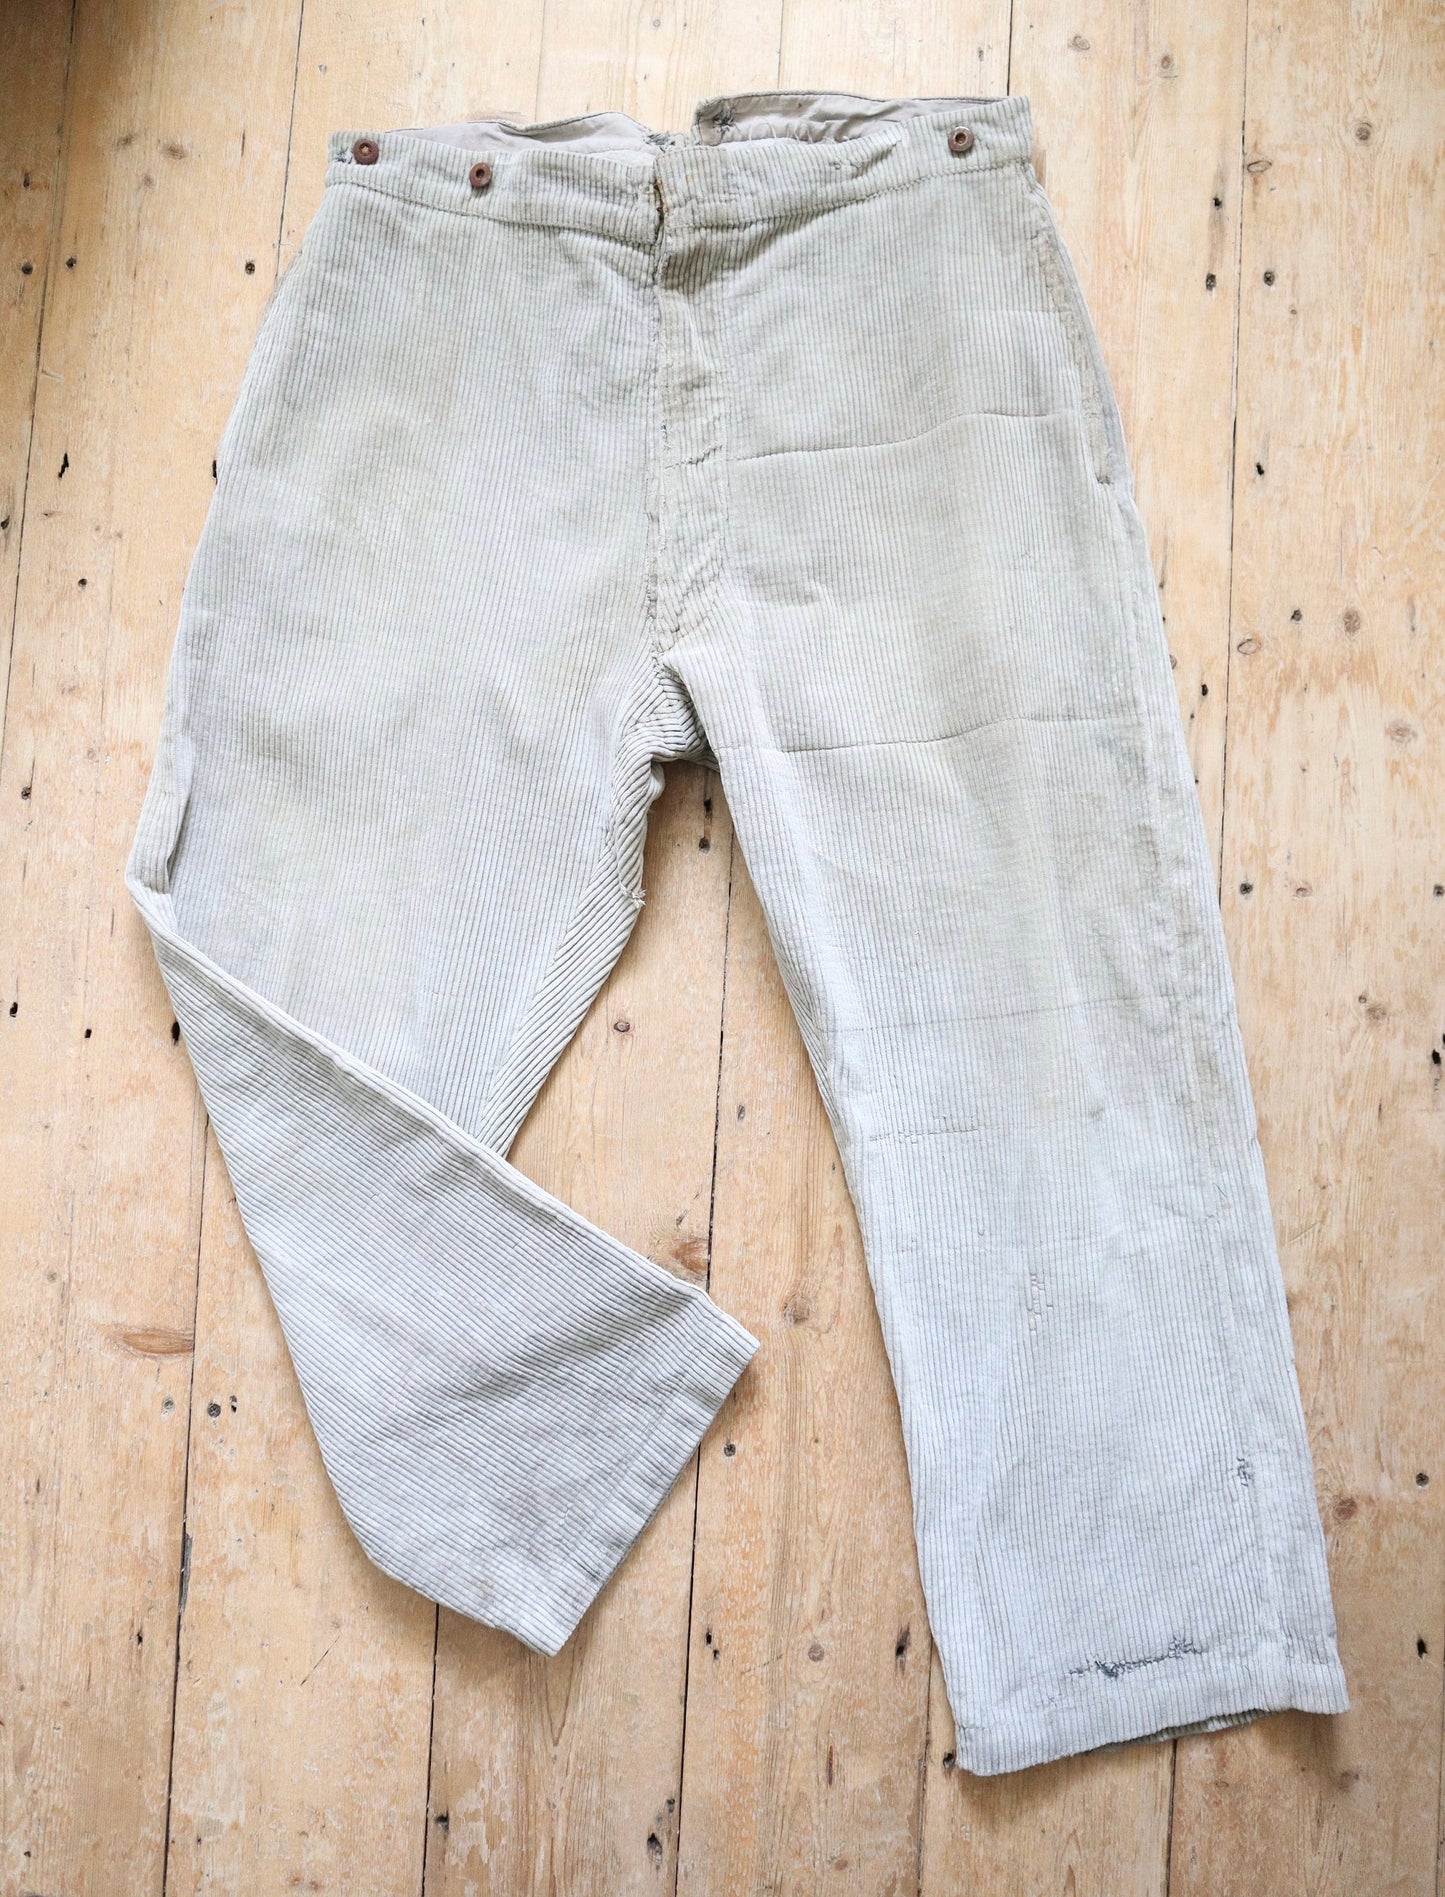 1940s French Corduroy Workwear Trousers Light Fawn Grey Repairs Chore Pants Cinch Metal Buckle Back